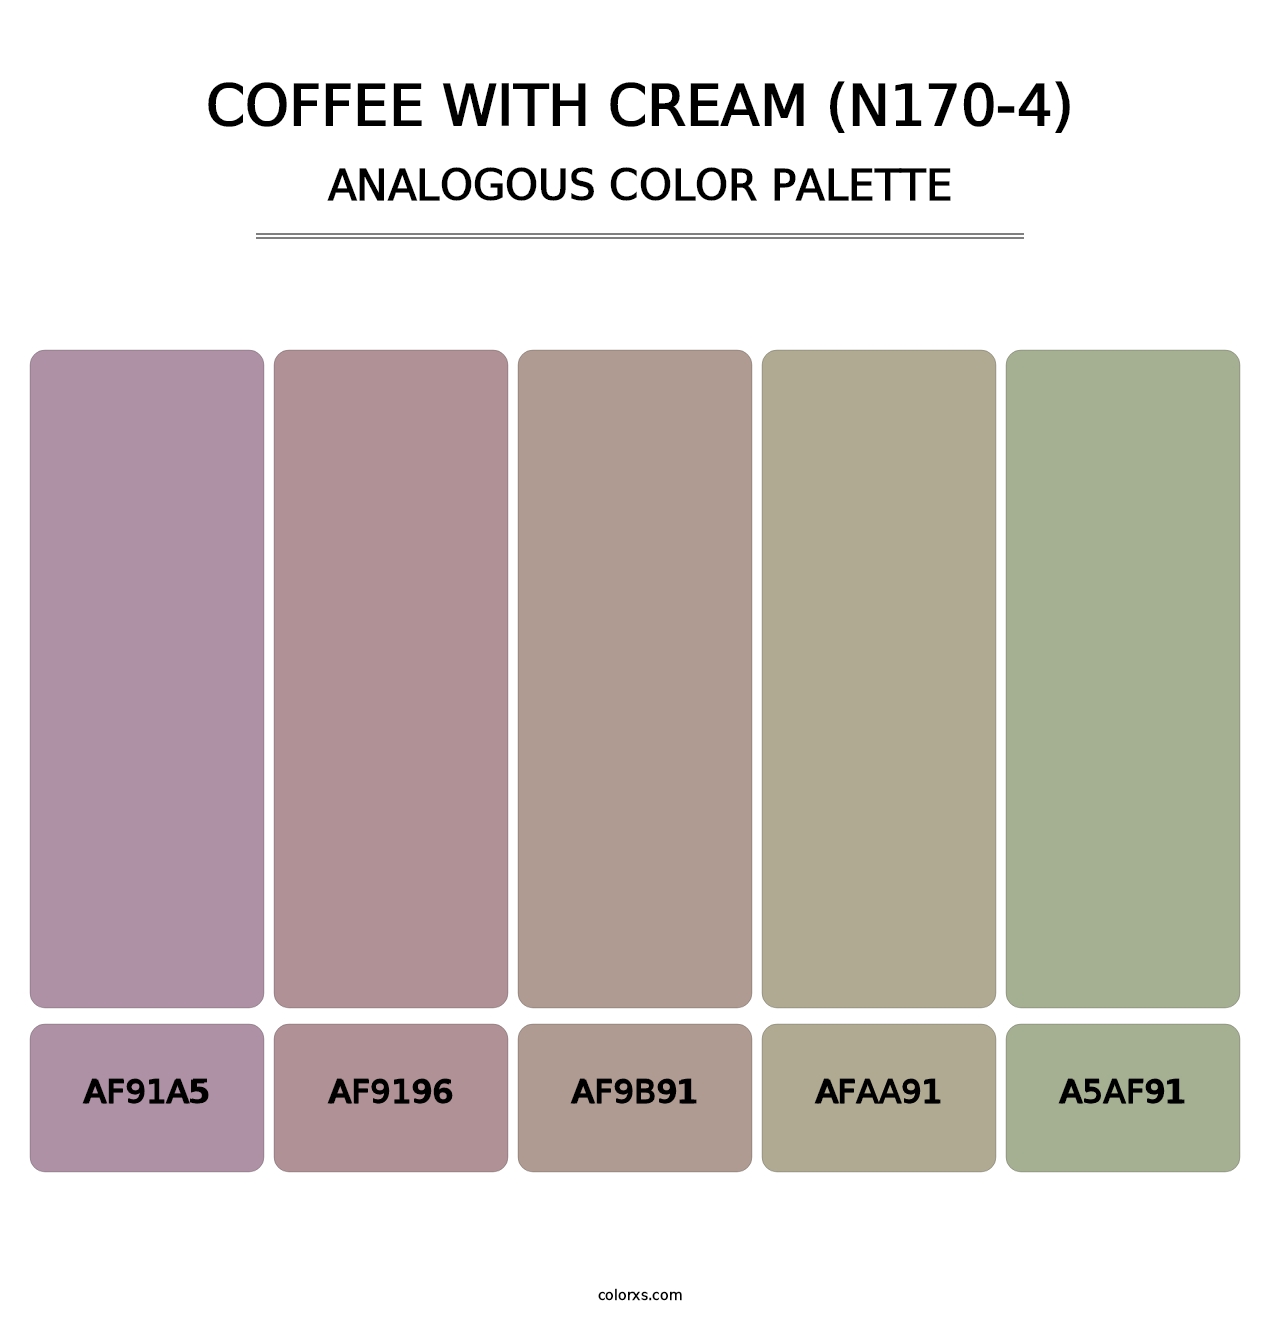 Coffee With Cream (N170-4) - Analogous Color Palette